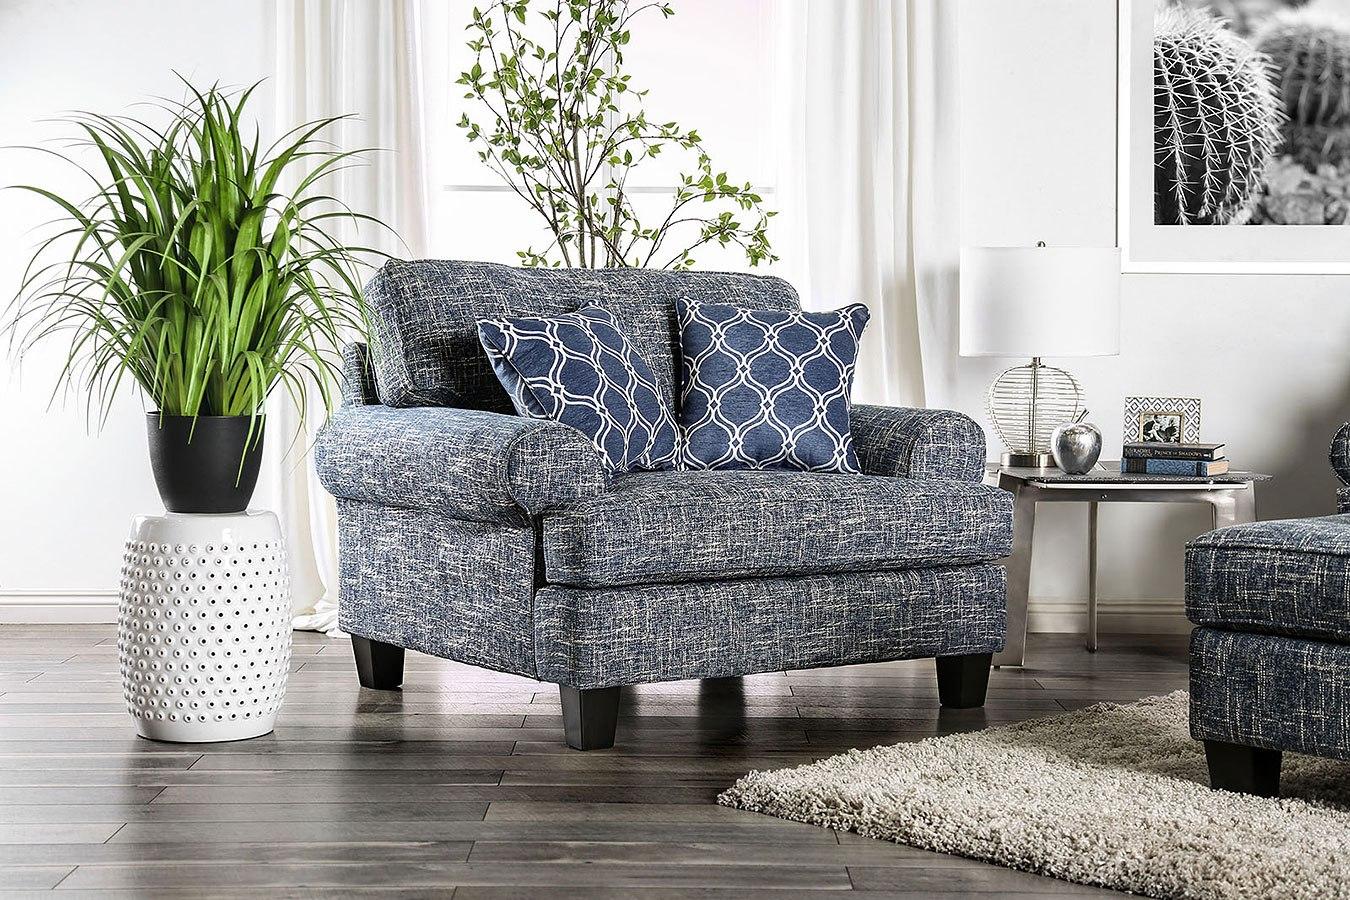 Transitional Oversized Chair PIERPONT SM8010-CH SM8010-CH in Blue 